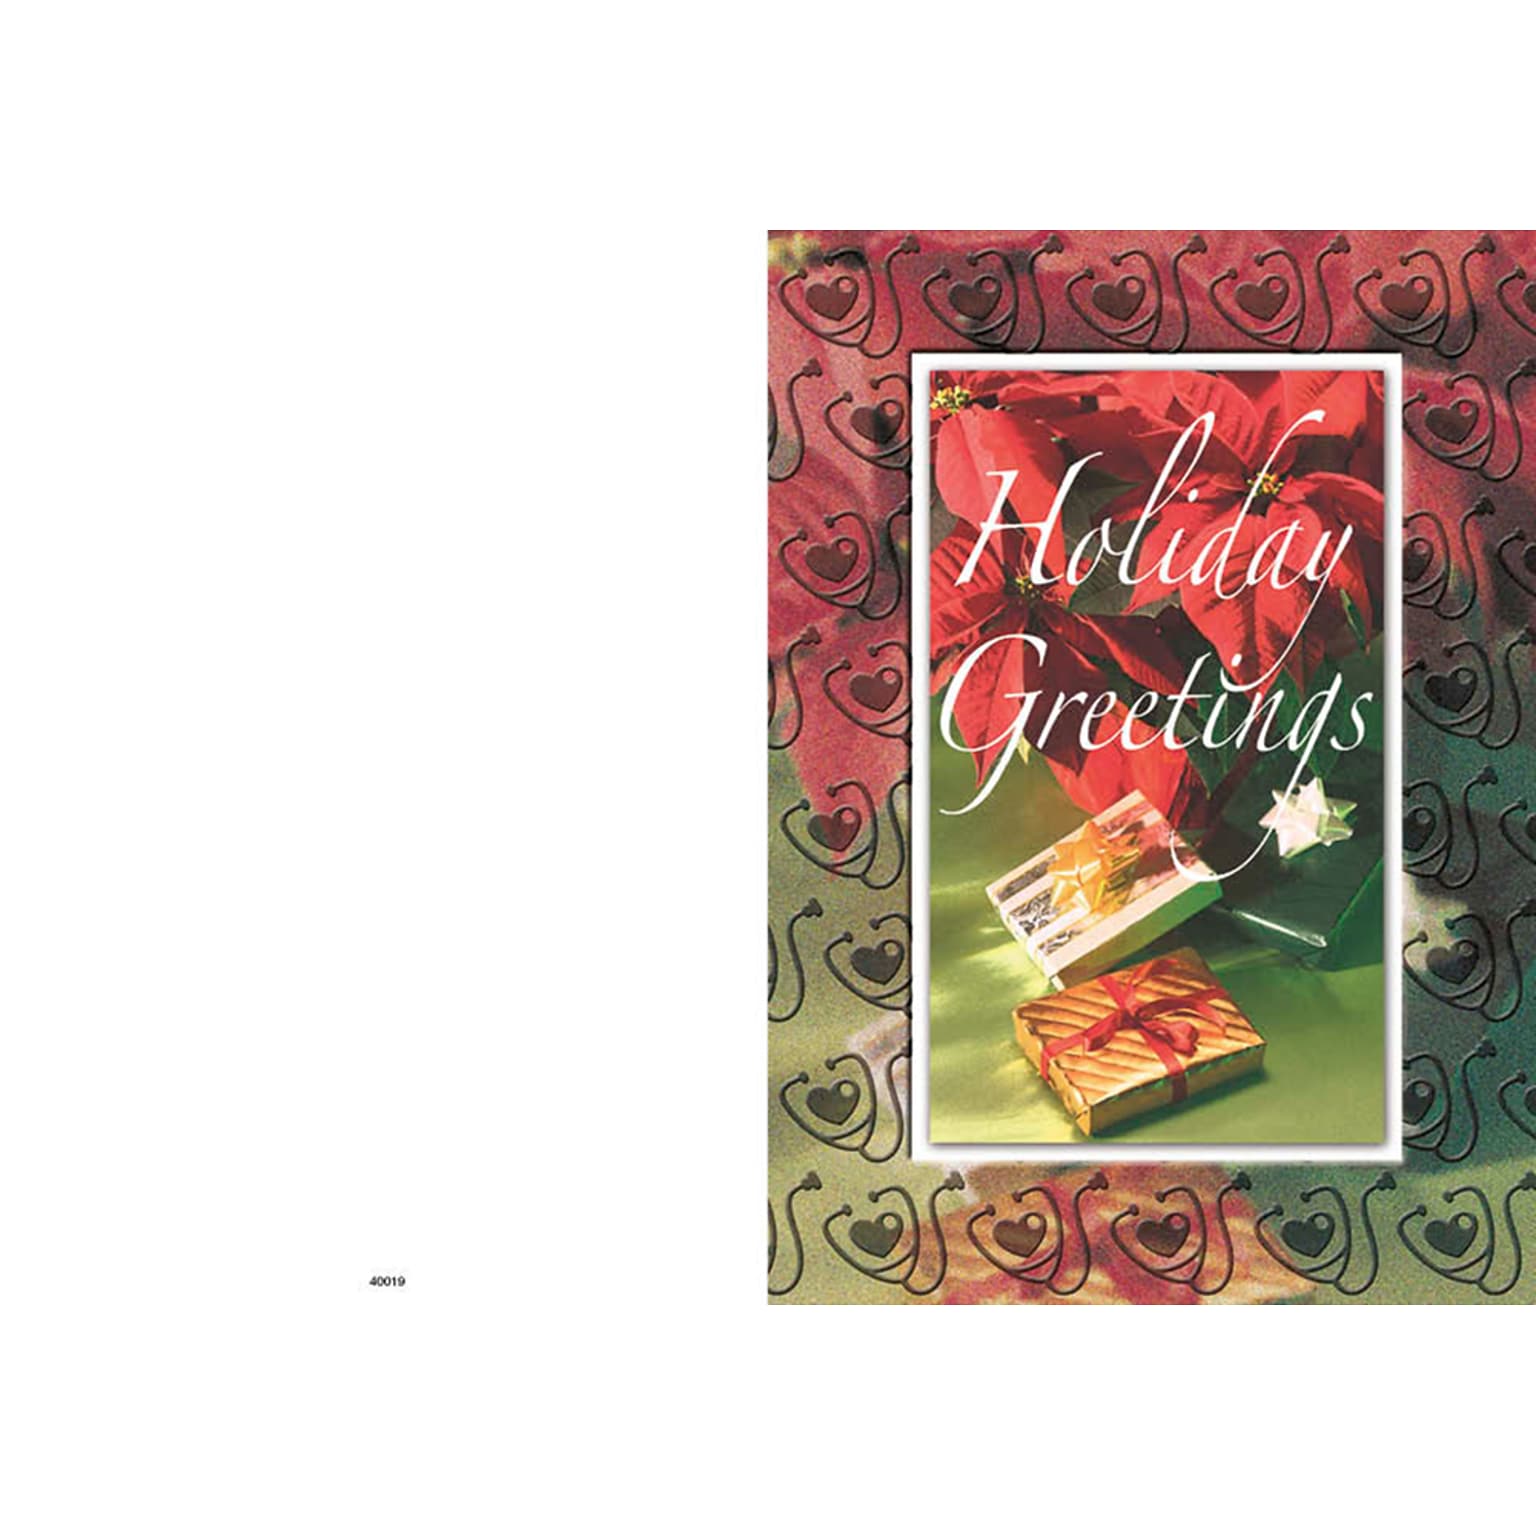 Holiday Greetings - presents - 7 x 10 scored for folding to 7 x 5, 25 cards w/A7 envelopes per set